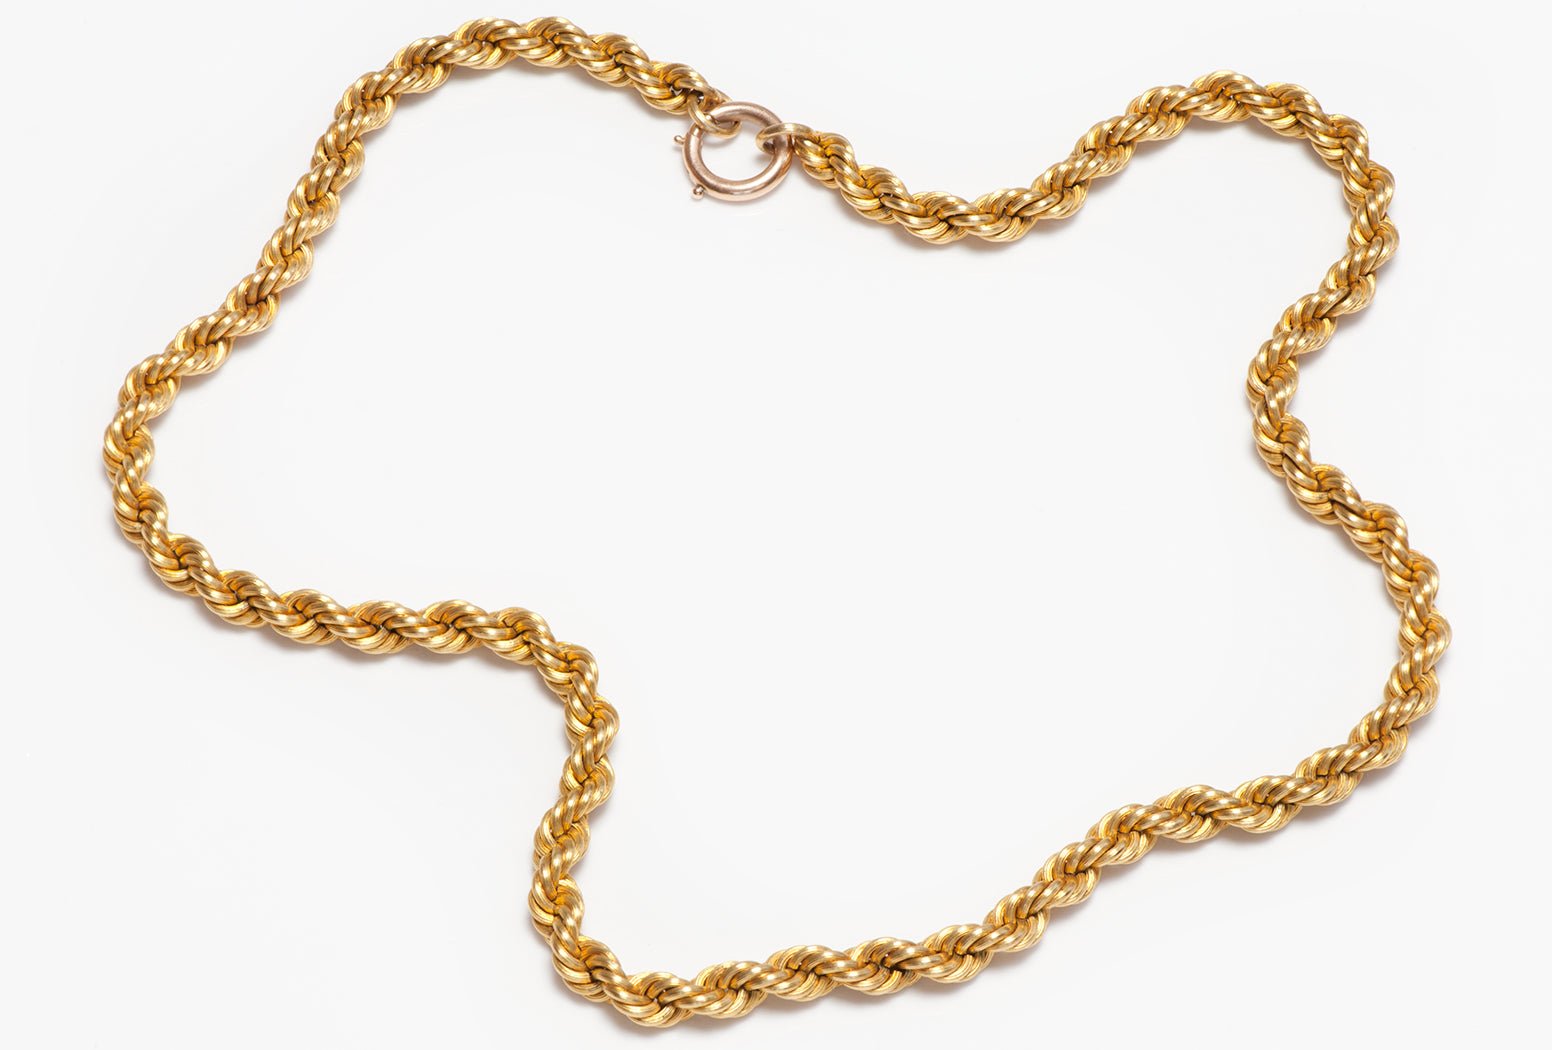 Antique Victorian 15K Yellow Gold Twisted Rope Chain Necklace